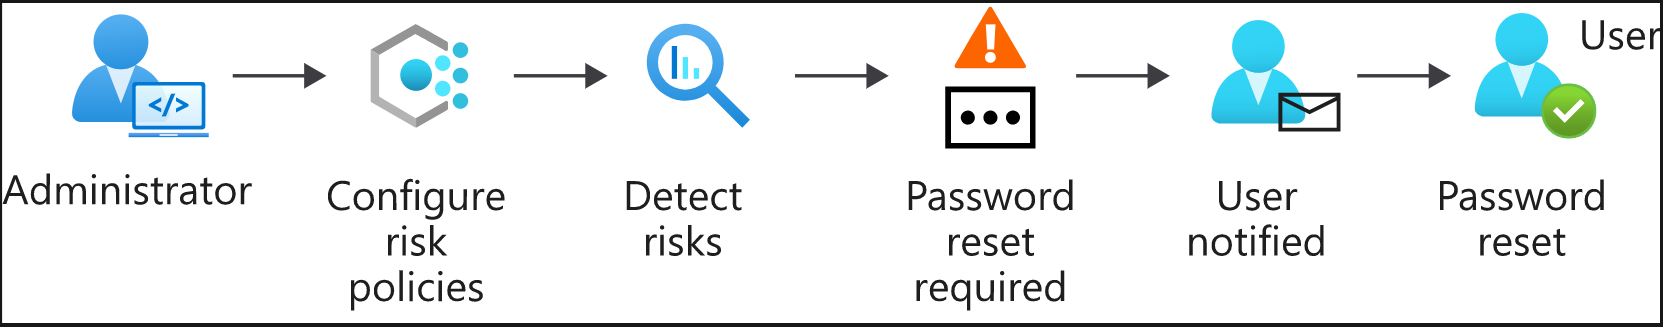 Protection workflow